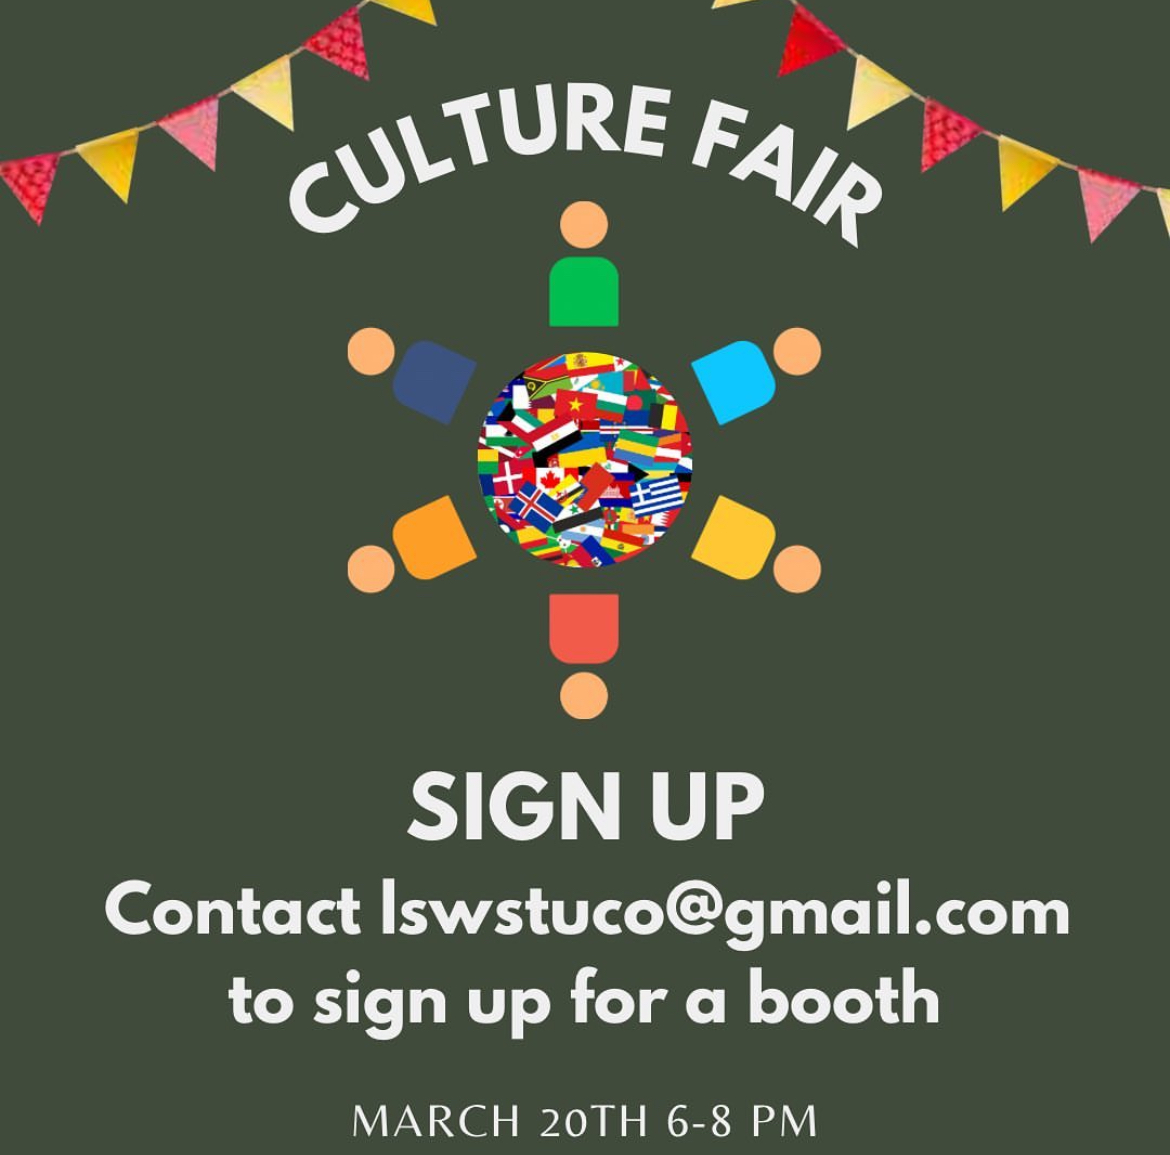 Student Council is hosting their first ever Culture Fair Wednesday, March 20th from 6 p.m. - 8 p.m. Admissions are free.